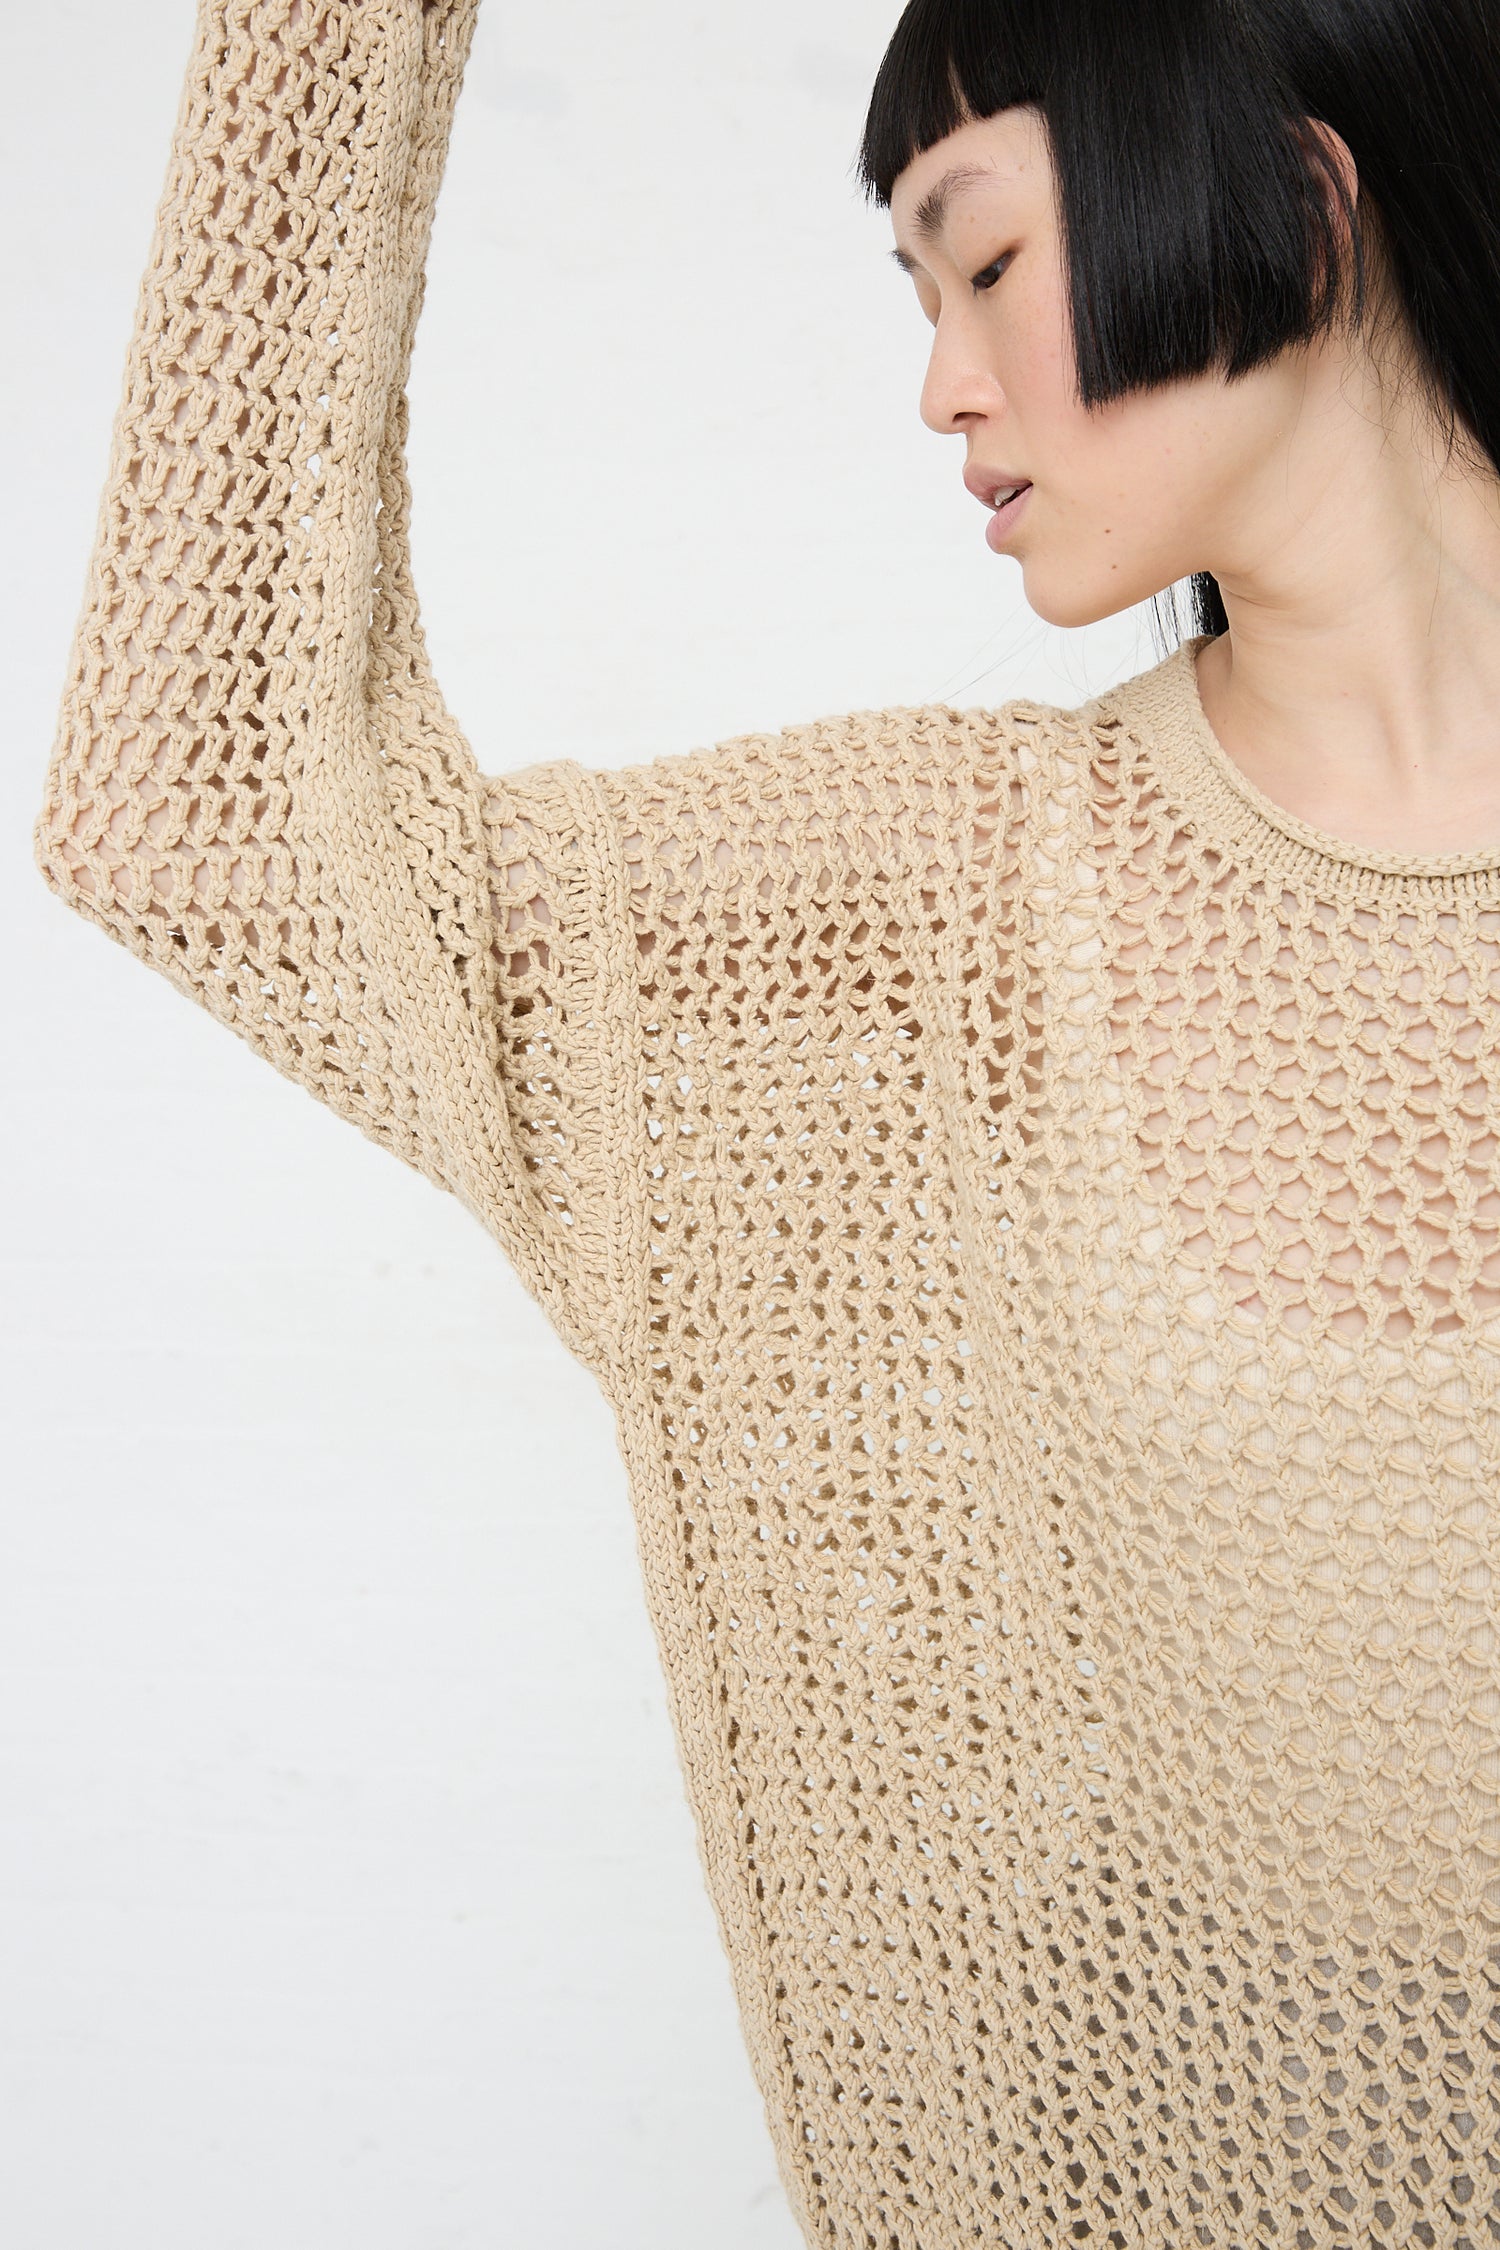 A person in a Lauren Manoogian Big Net Pullover in Jute raising their arm, displaying the sweater's texture.